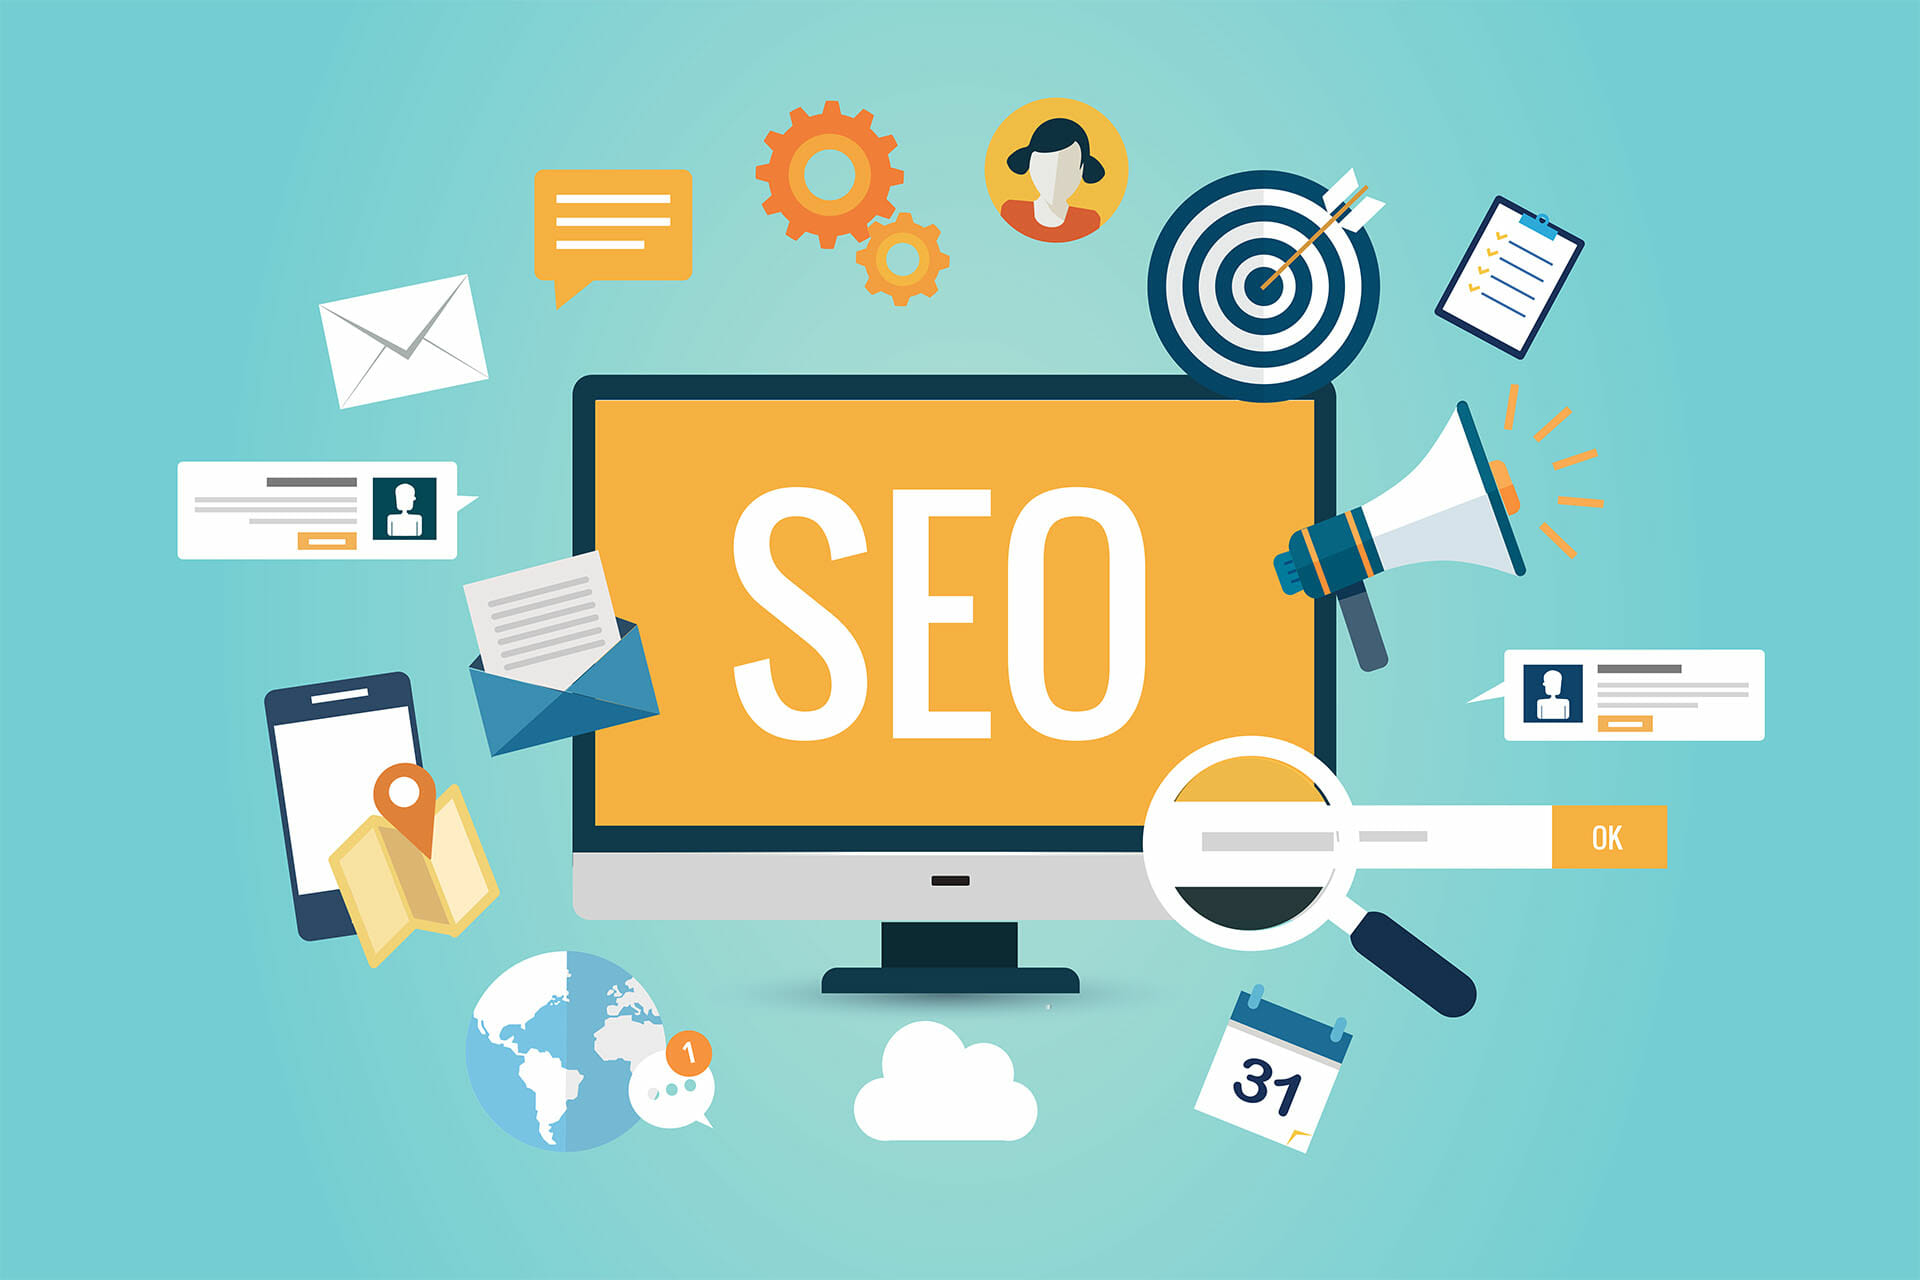 Make use of search engine optimization tools